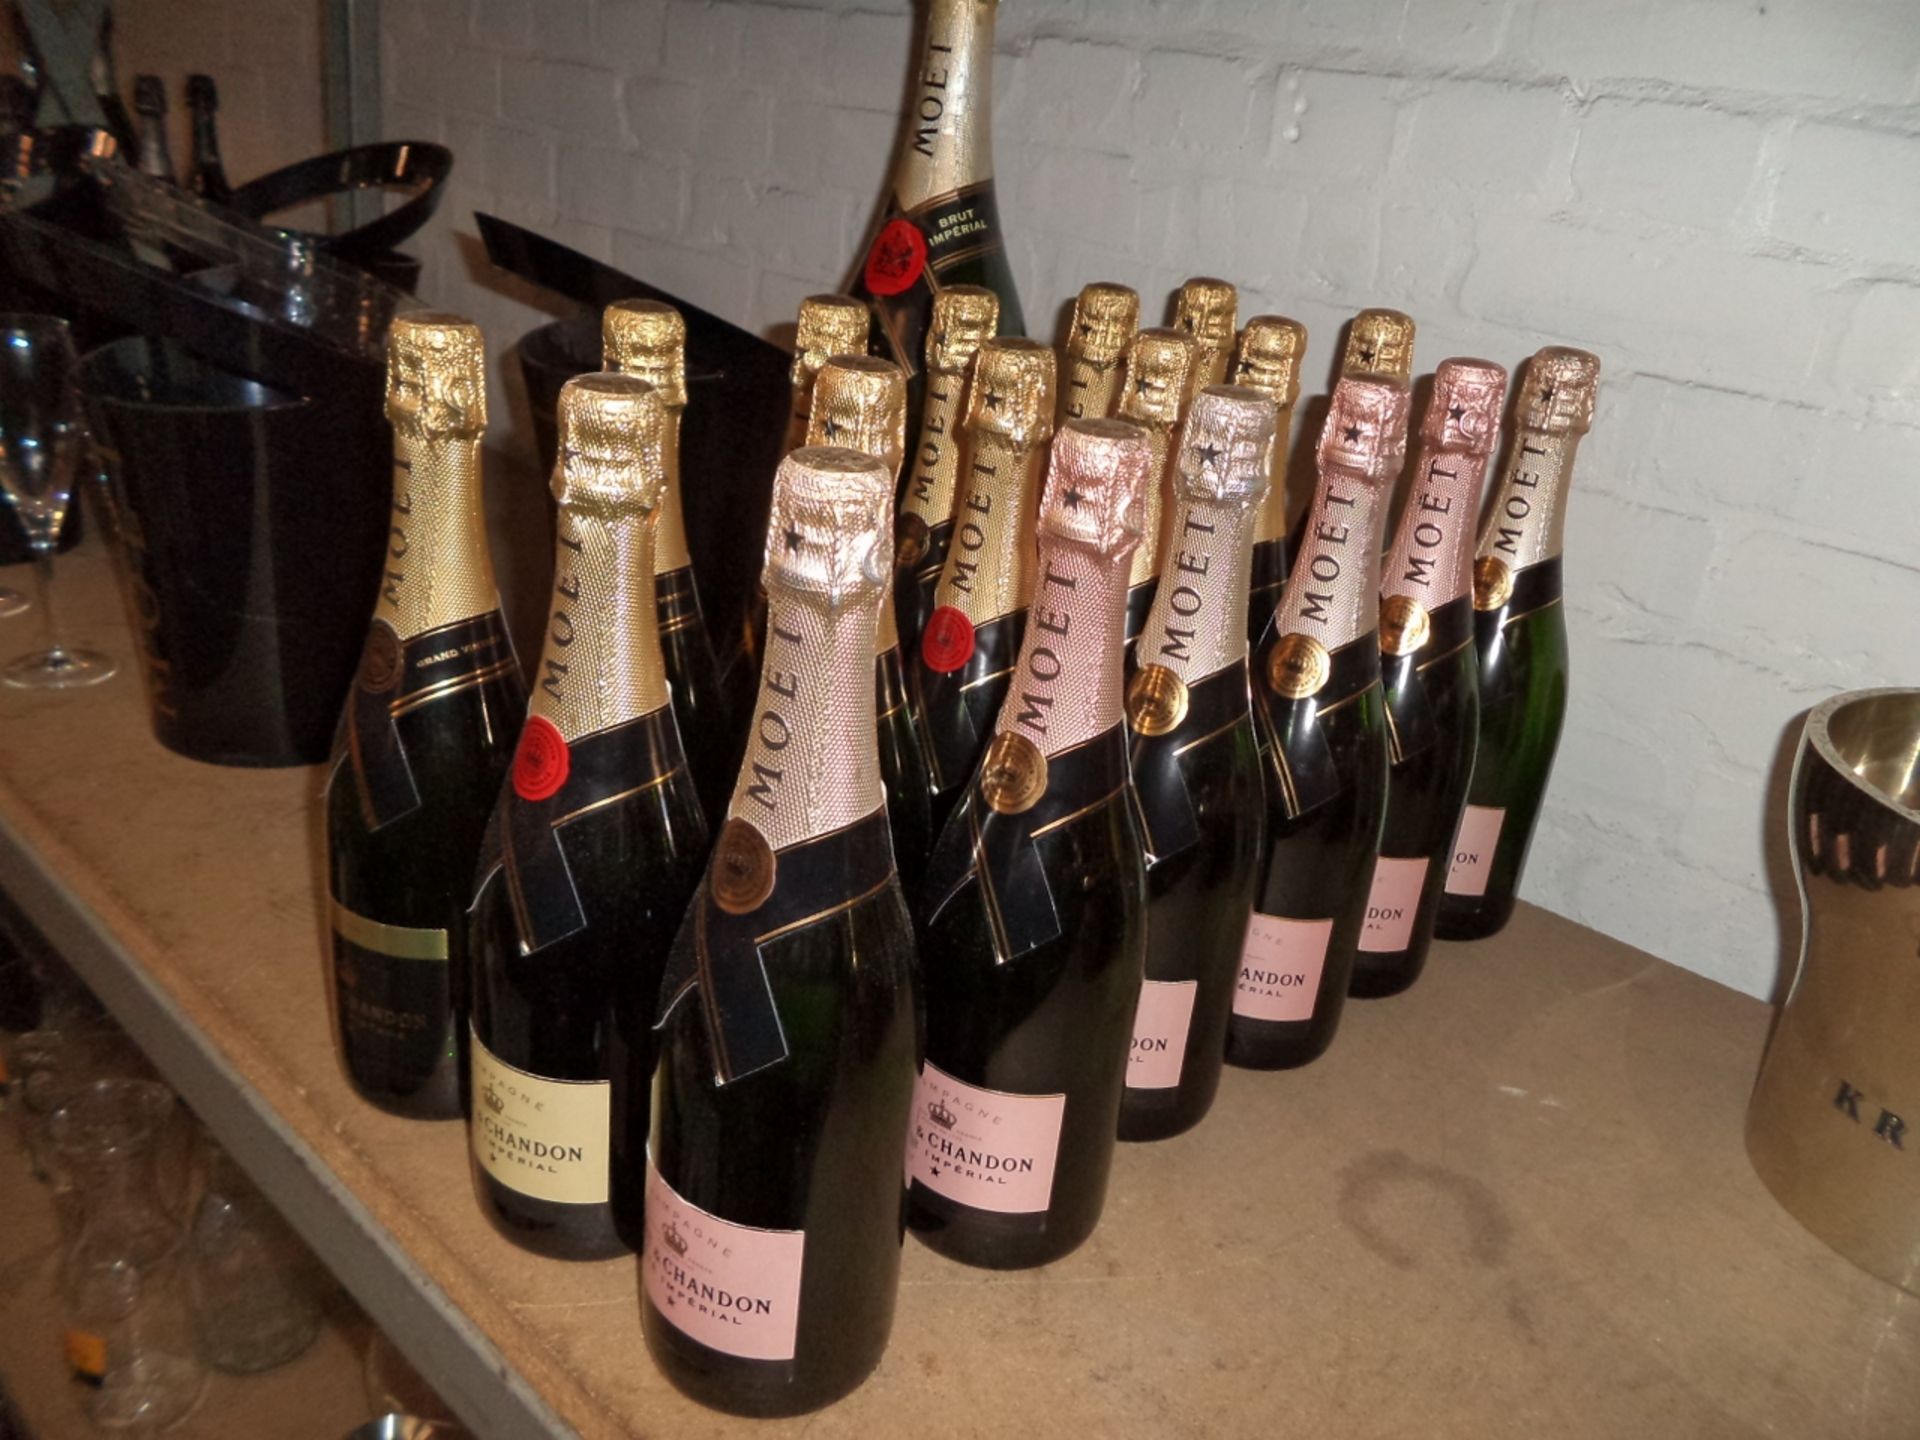 19 off Moet & Chandon Champagne dummy display bottles, including both white and rose non-vintage, - Image 4 of 4